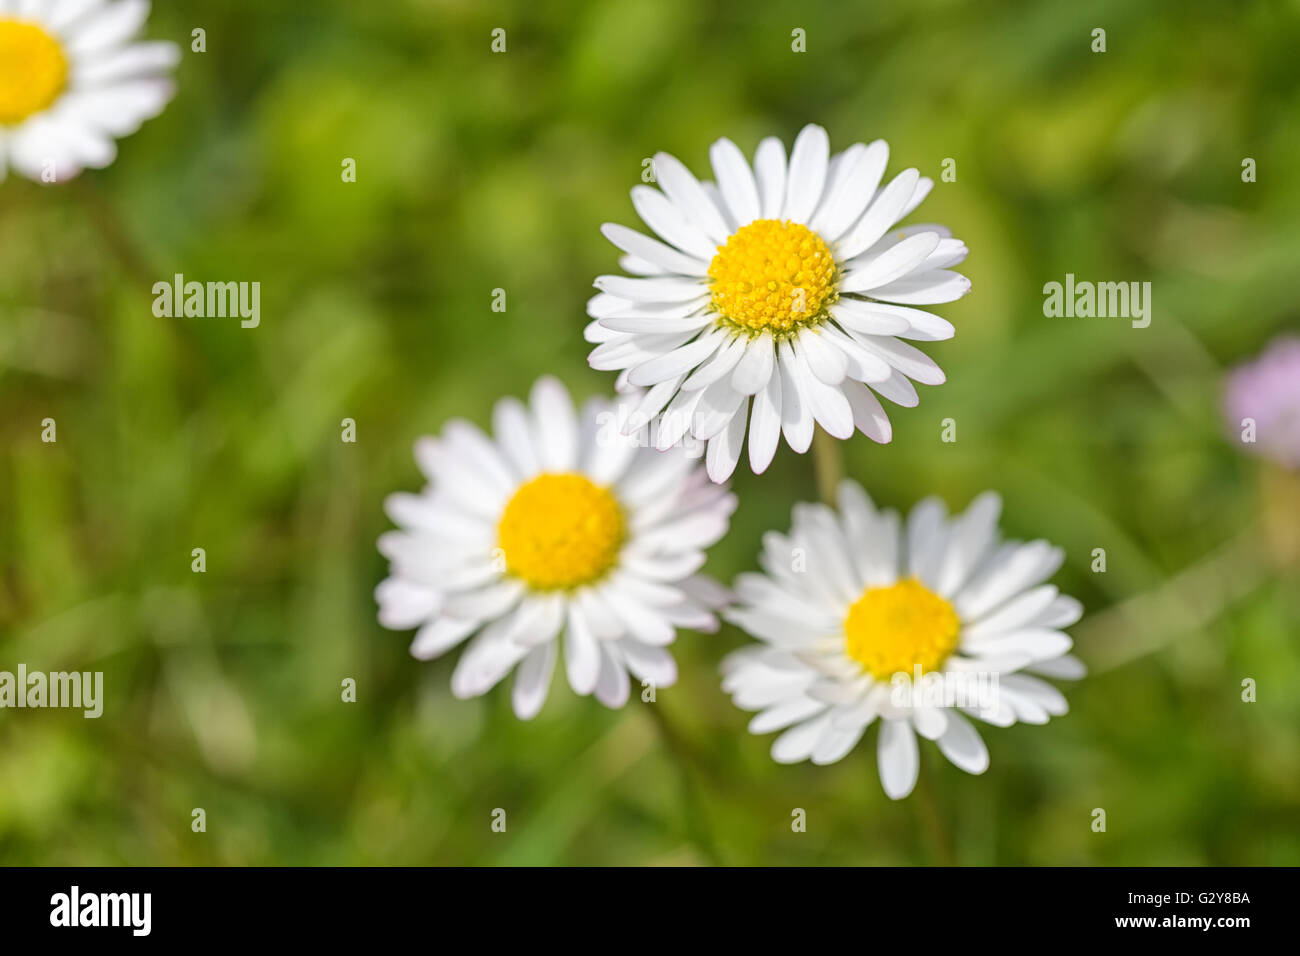 Macro shot of three white daisy flowers in a field of daisies Stock Photo